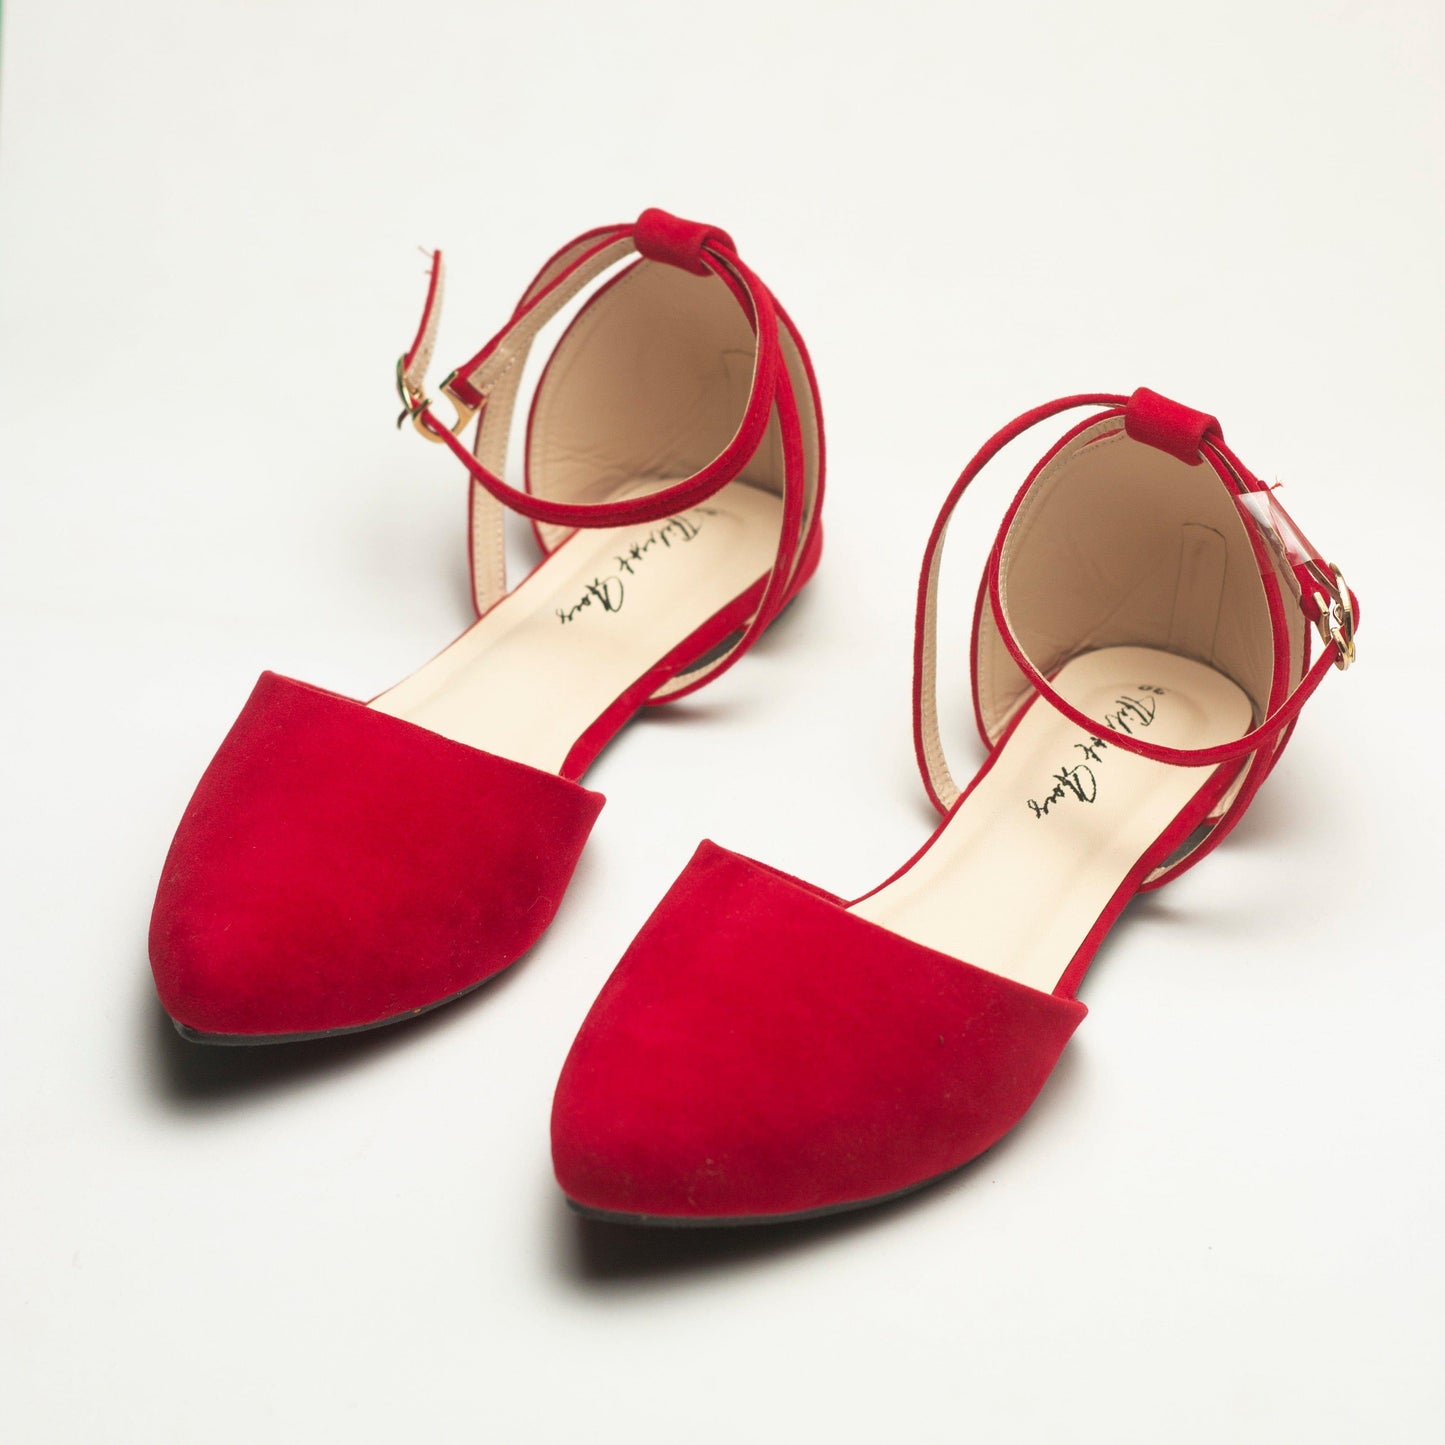 Nawabi Shoes BD Shoes 35 / red Flat Sandals for Women: The Must-Have for Your Summer Wardrobe